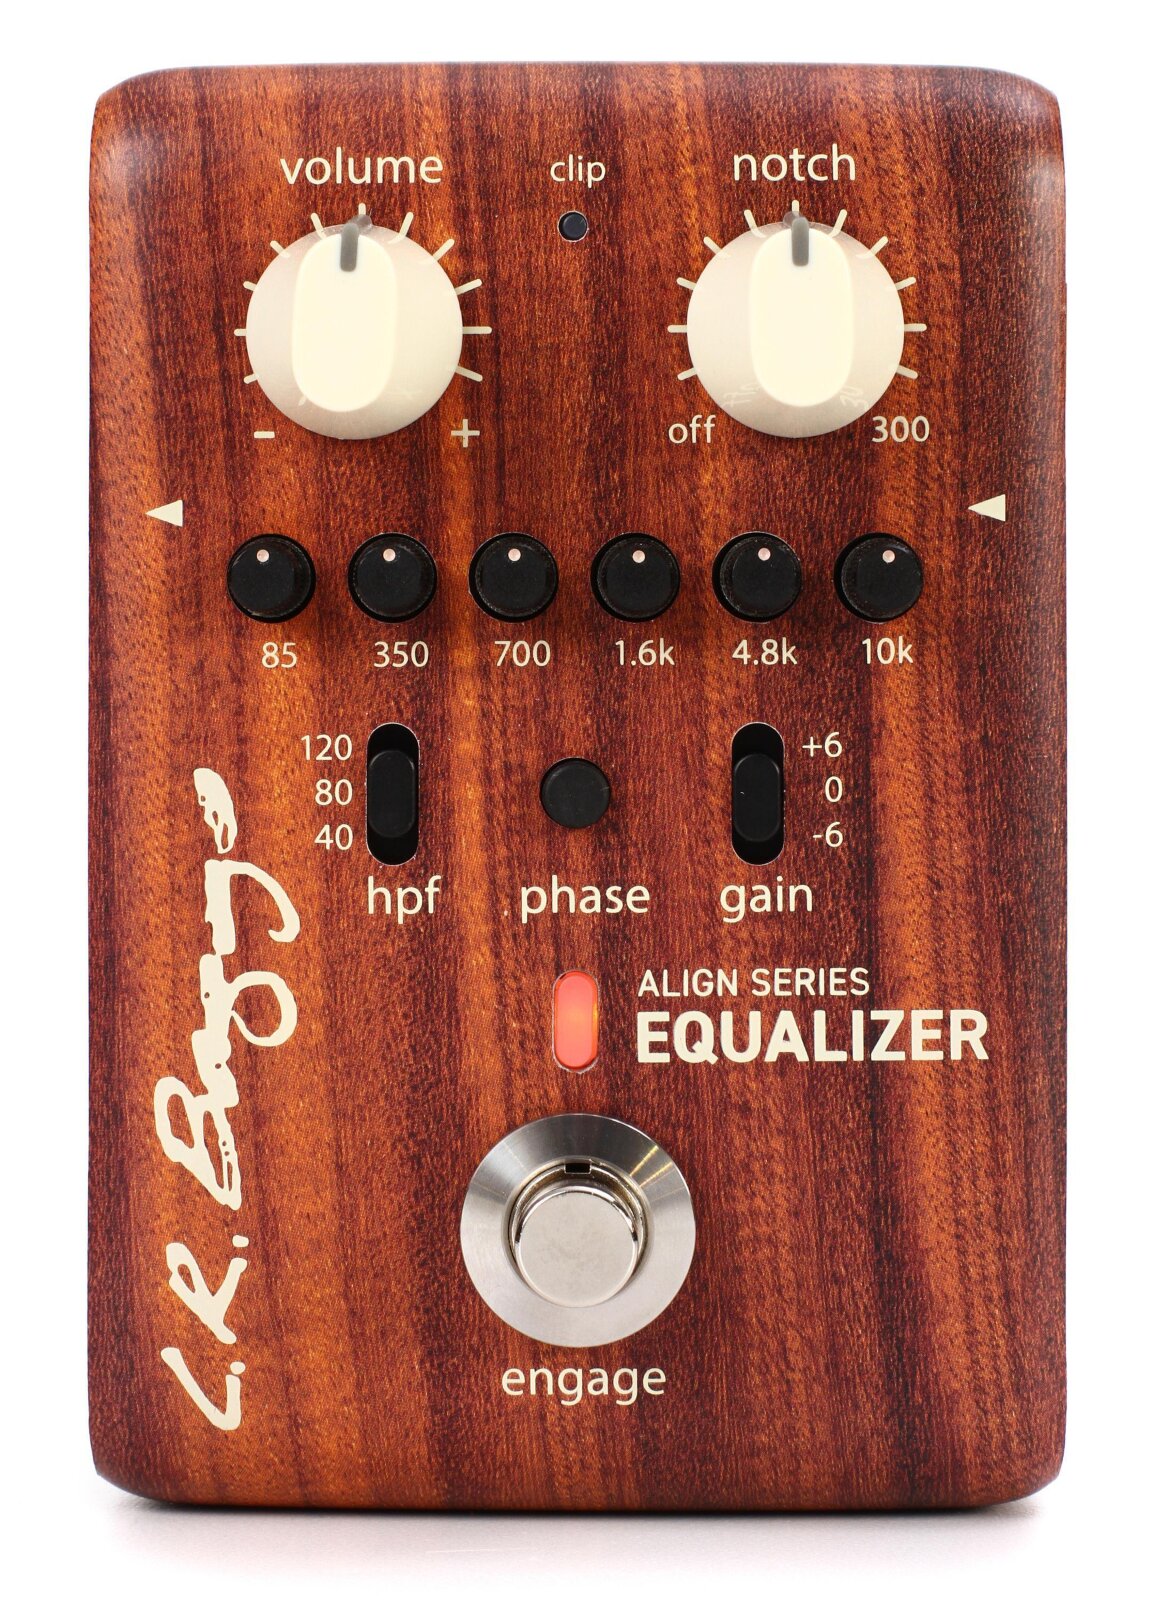 LR Baggs Align Series Equalizer : photo 1